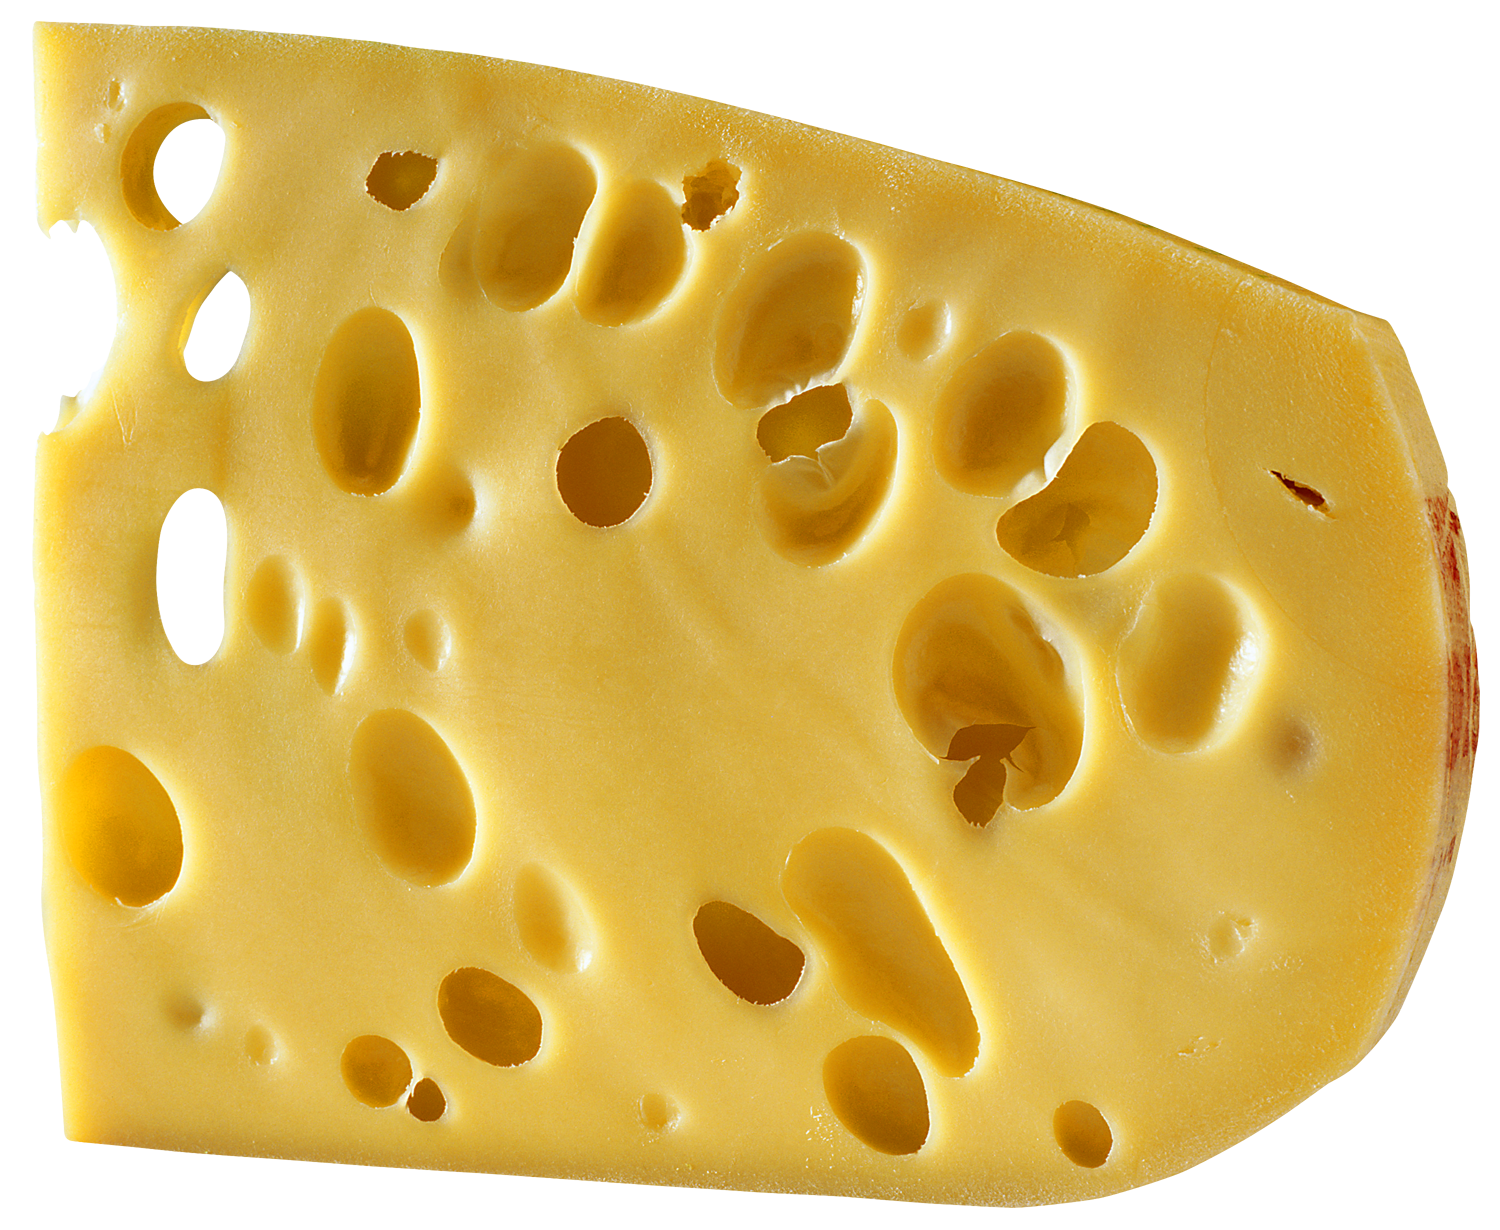 cheese wedge png